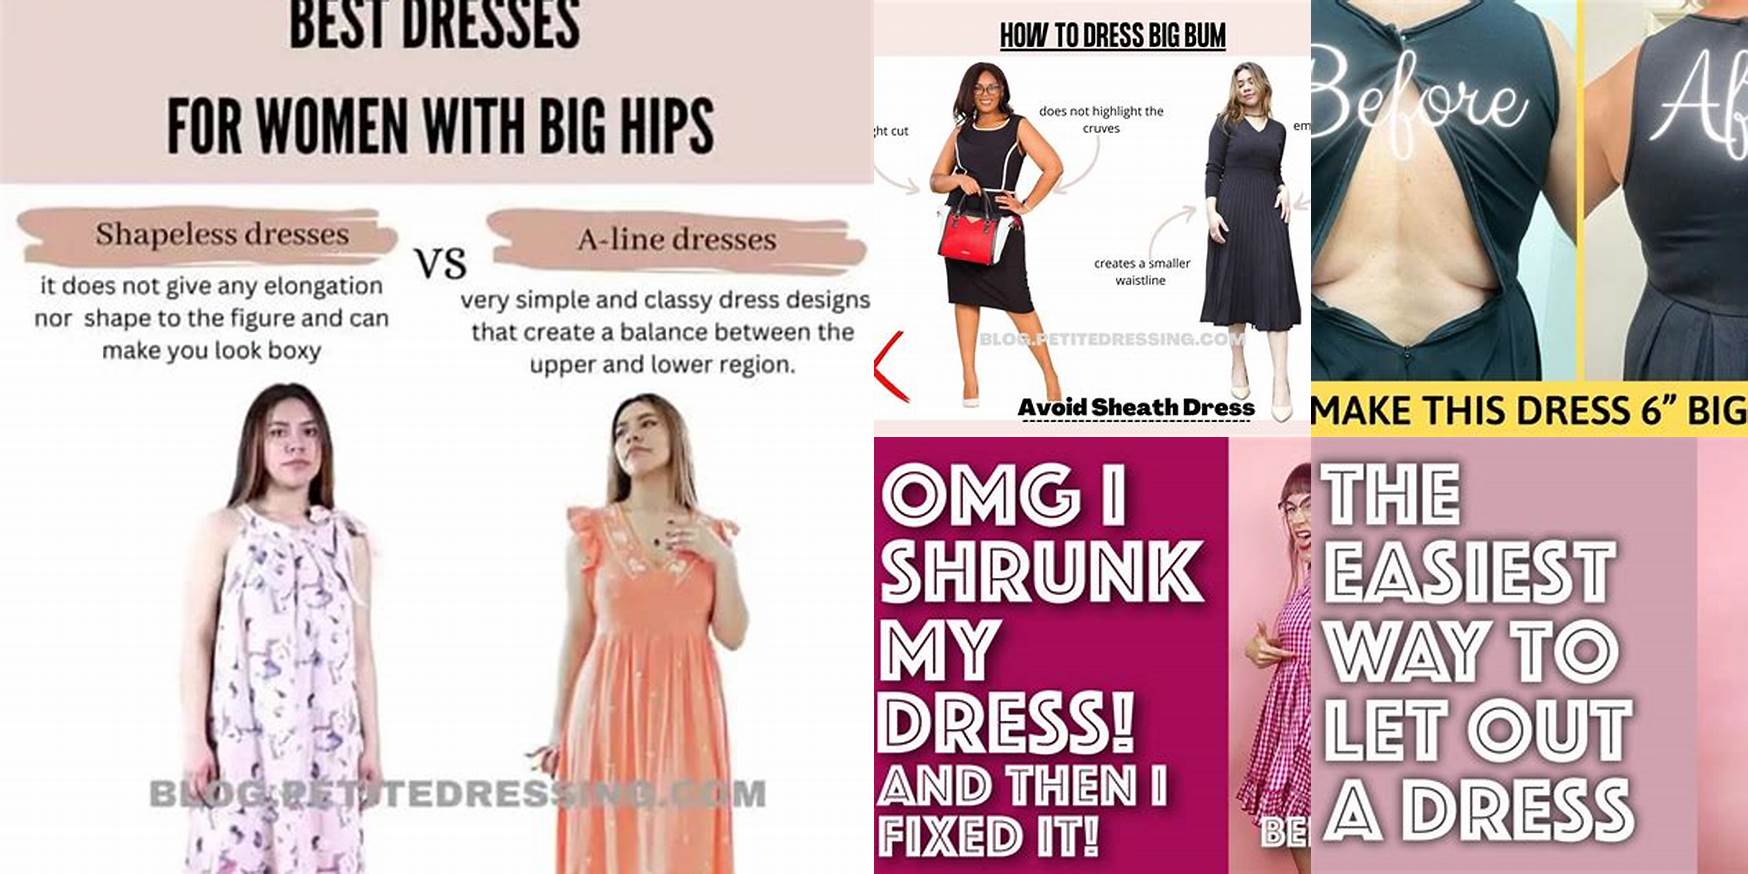 How To Make A Dress Bigger In The Hips